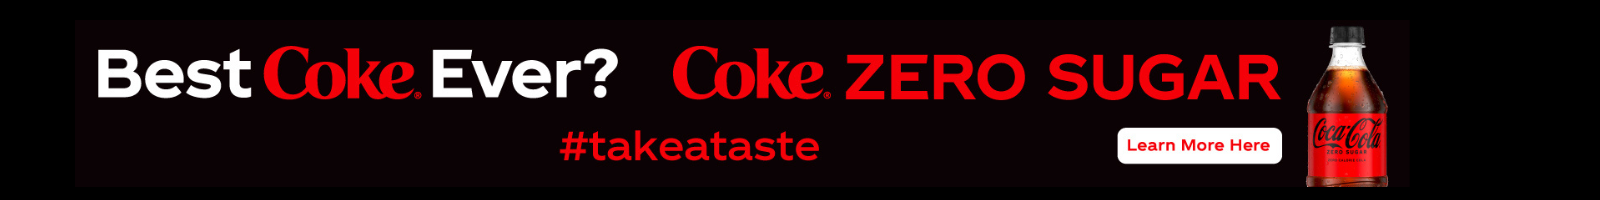 More Info for Coca-Cola 2.png